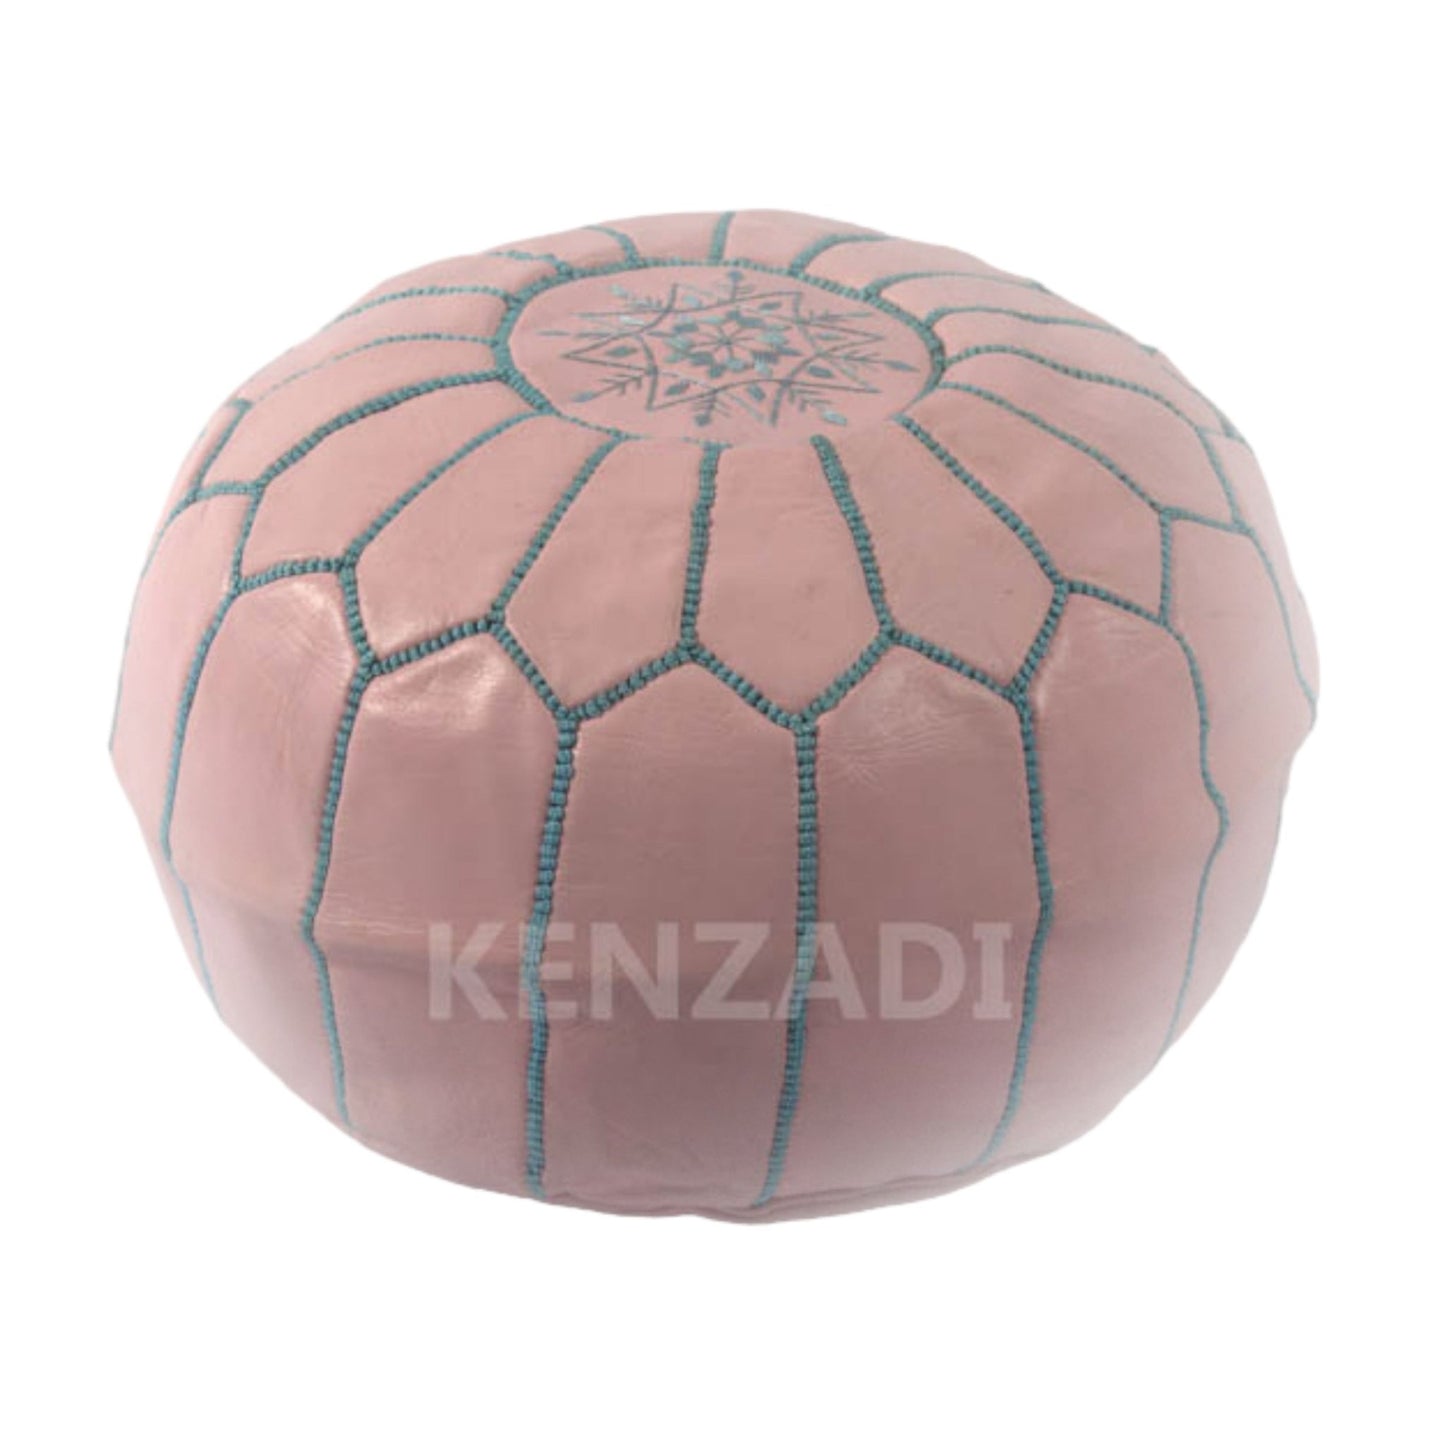 Moroccan leather pouf, round pouf, berber pouf, Pink pouf with Light blue embroidery by Kenzadi - Handmade by My Poufs